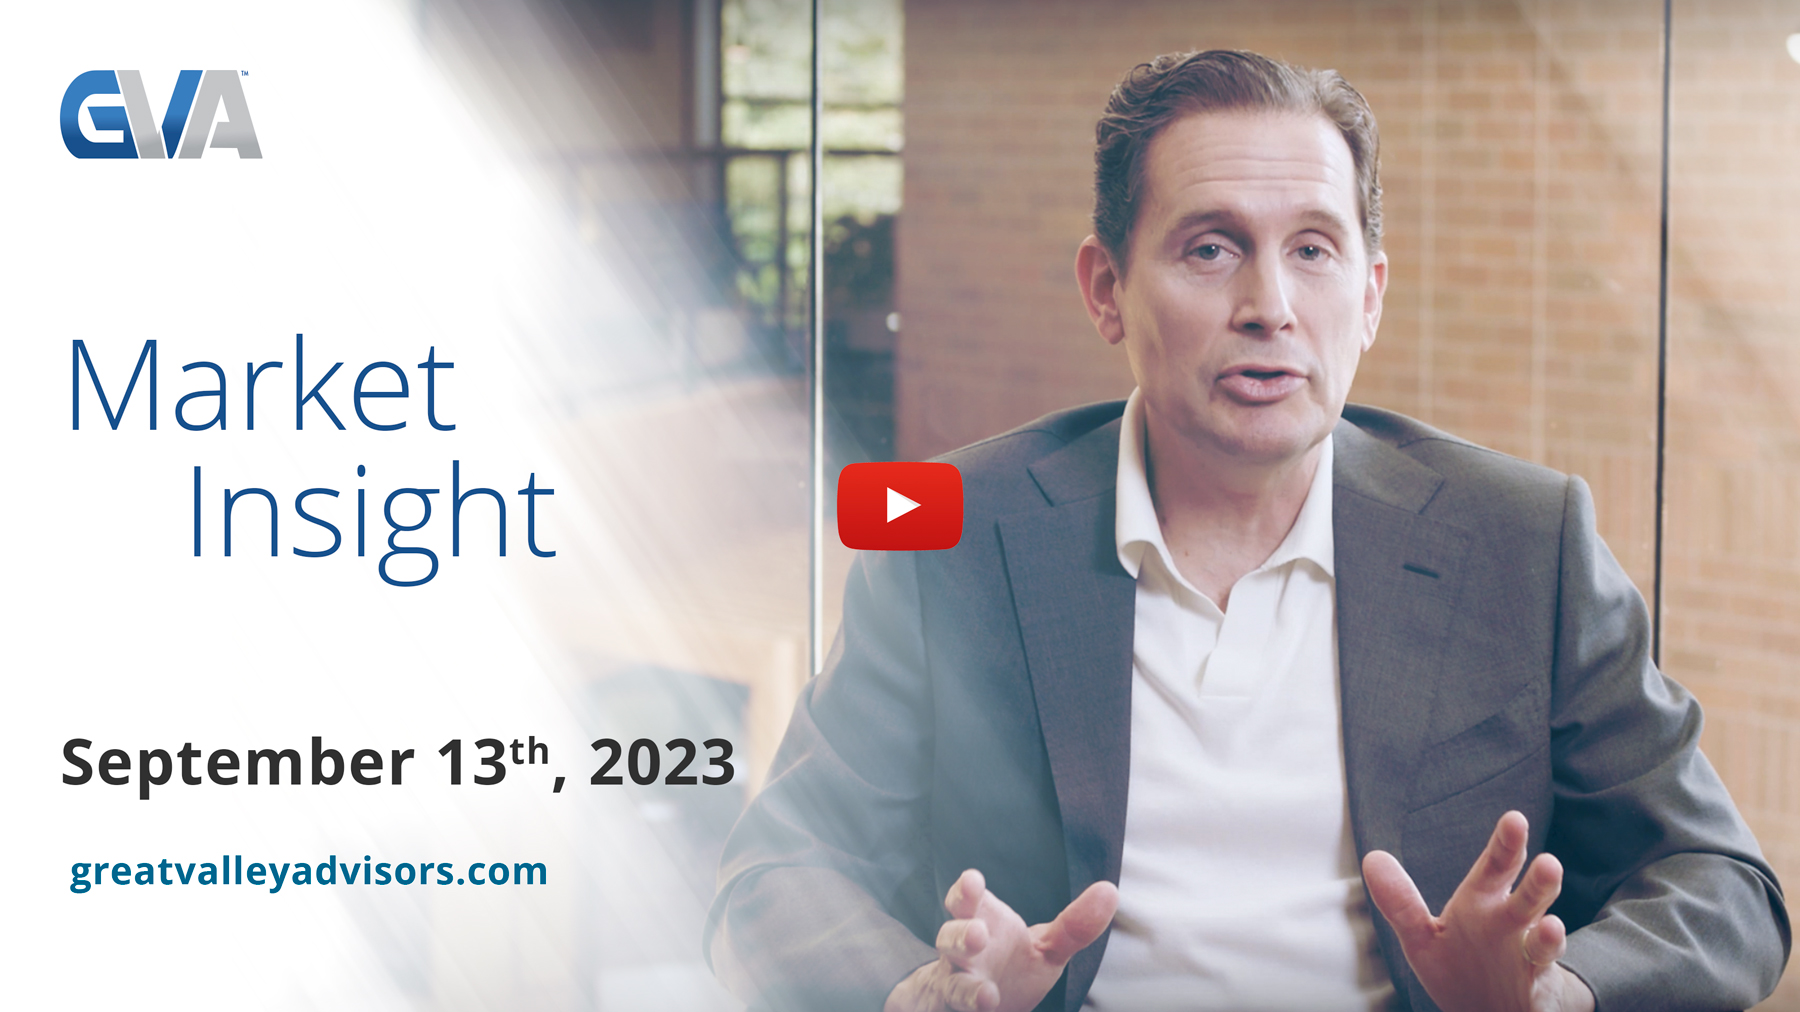 Market Insights with Eric: Episode 9, September 13th, 2023